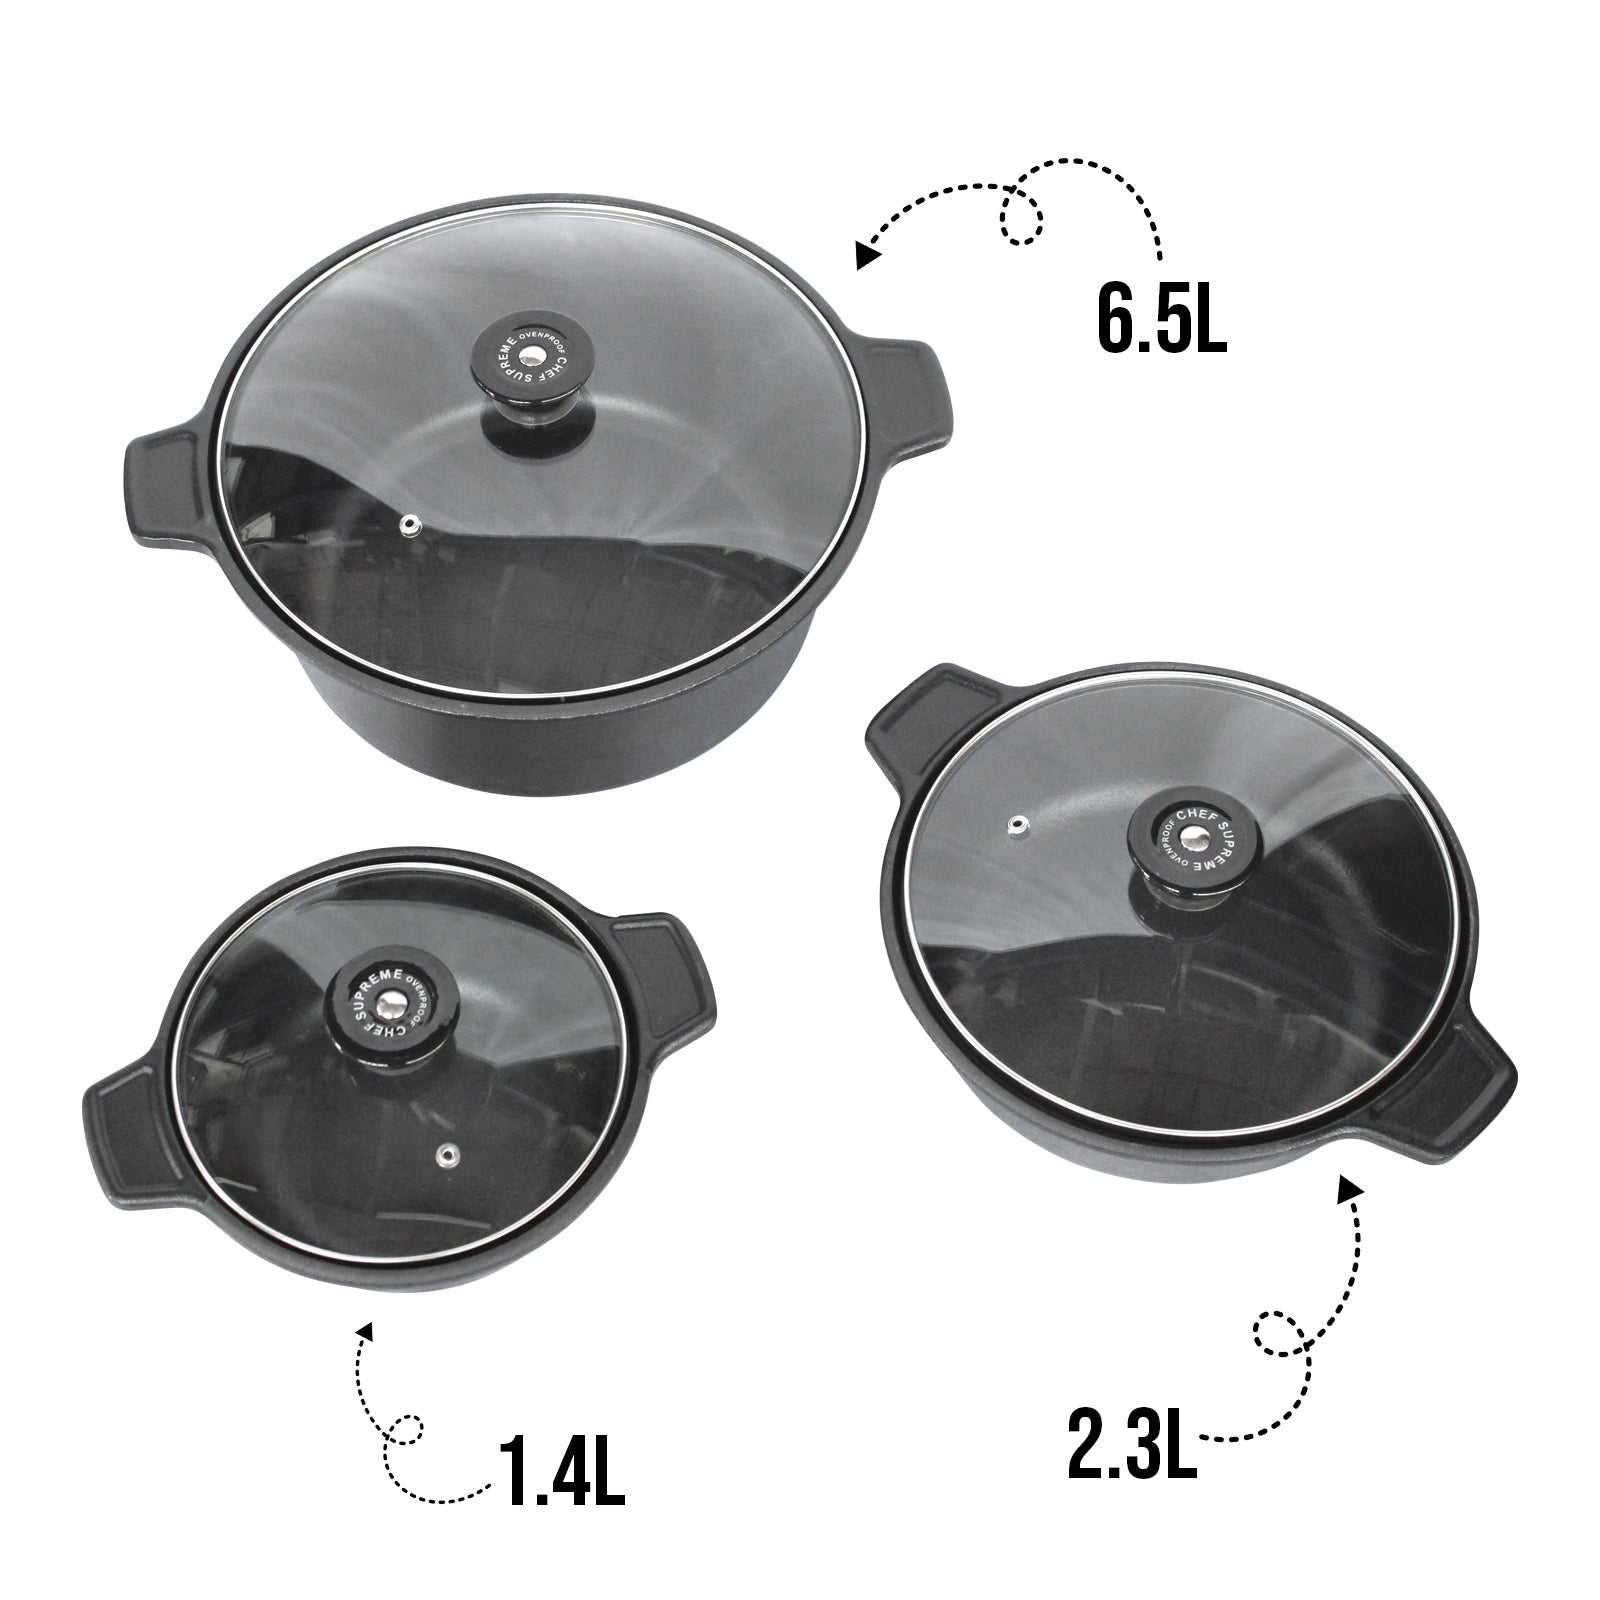 Casserole Dish Set with 3 Different Sizes